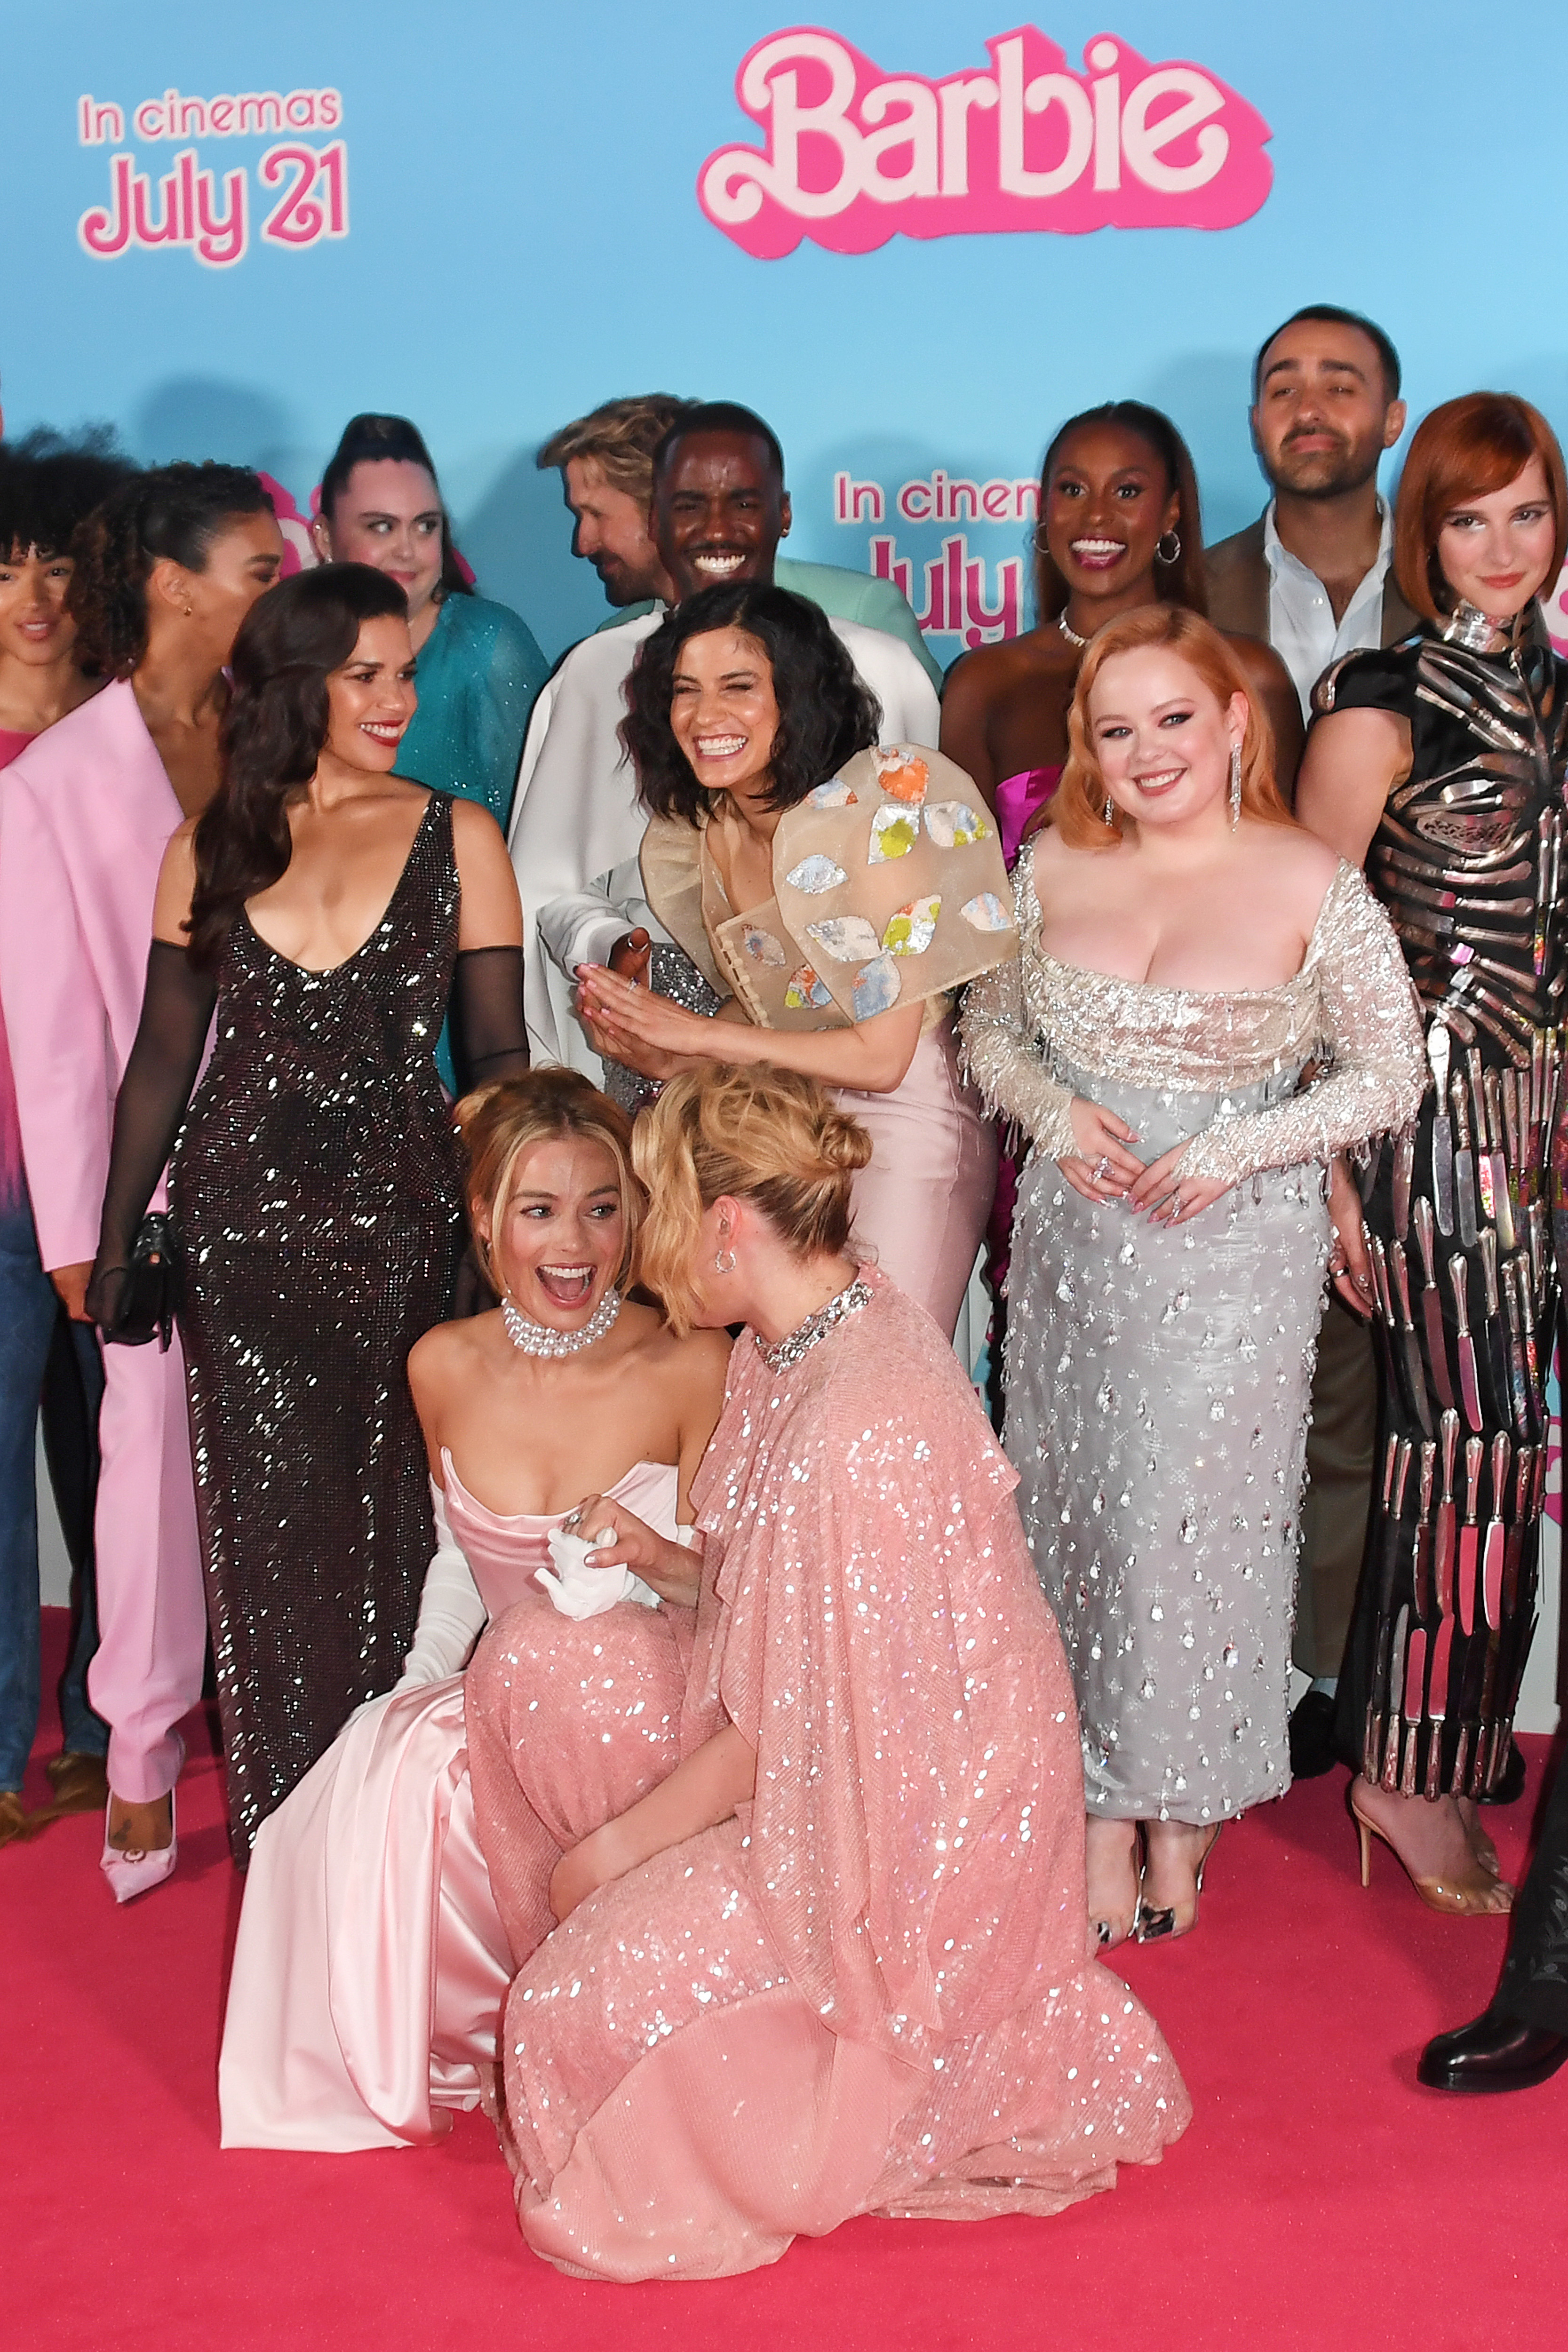 the cast squeezing in for a photo on the red carpet